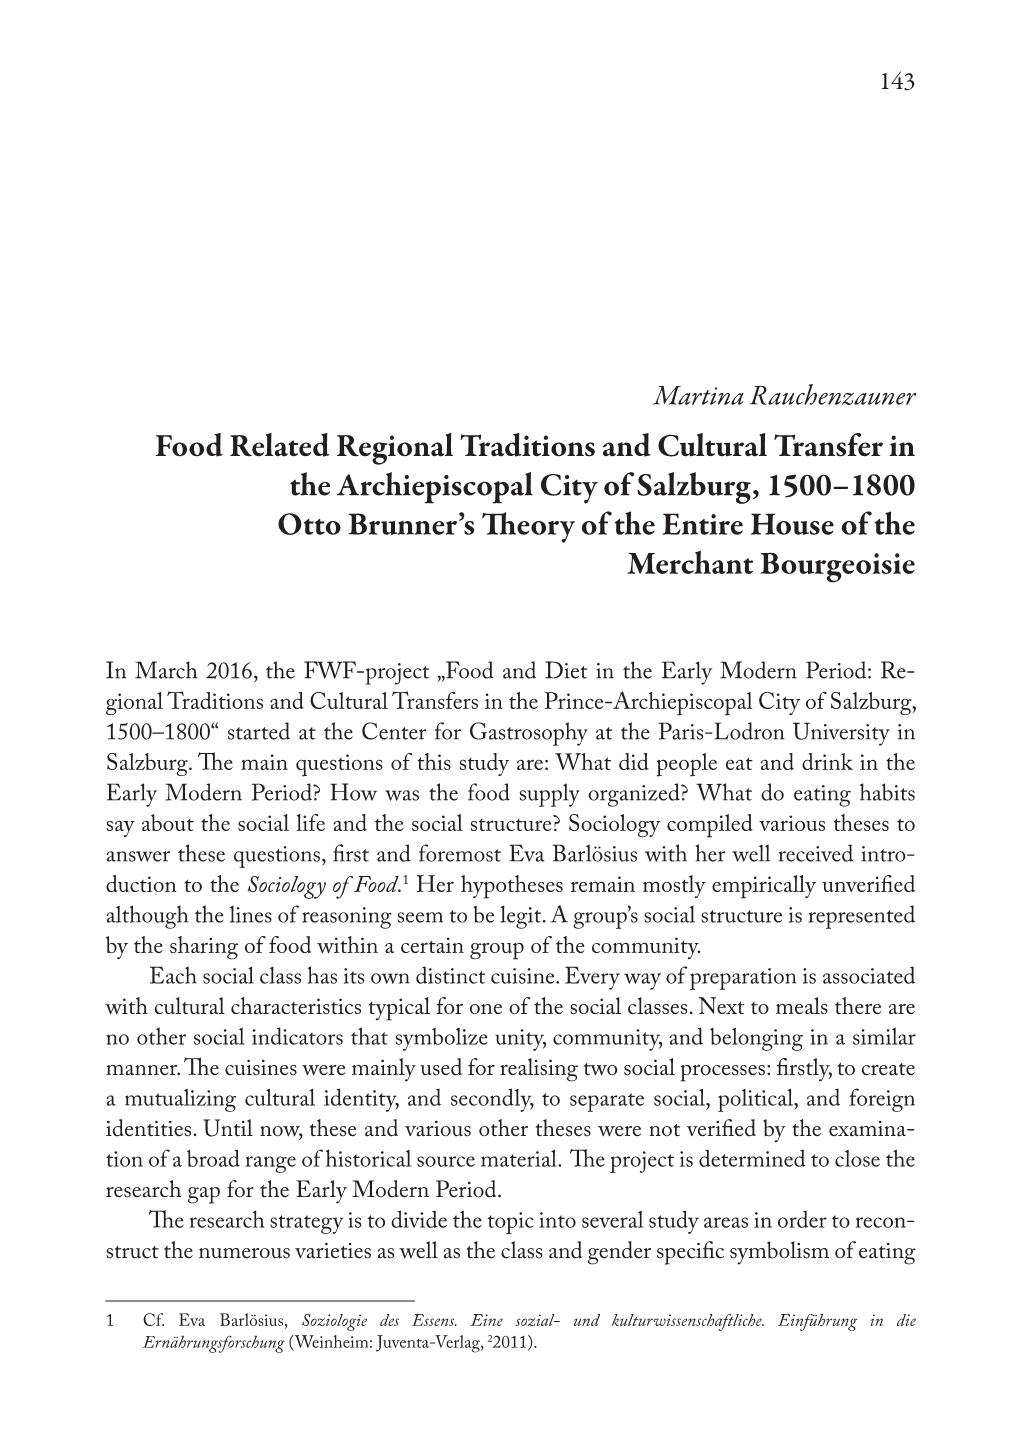 Food Related Regional Traditions and Cultural Transfer in The